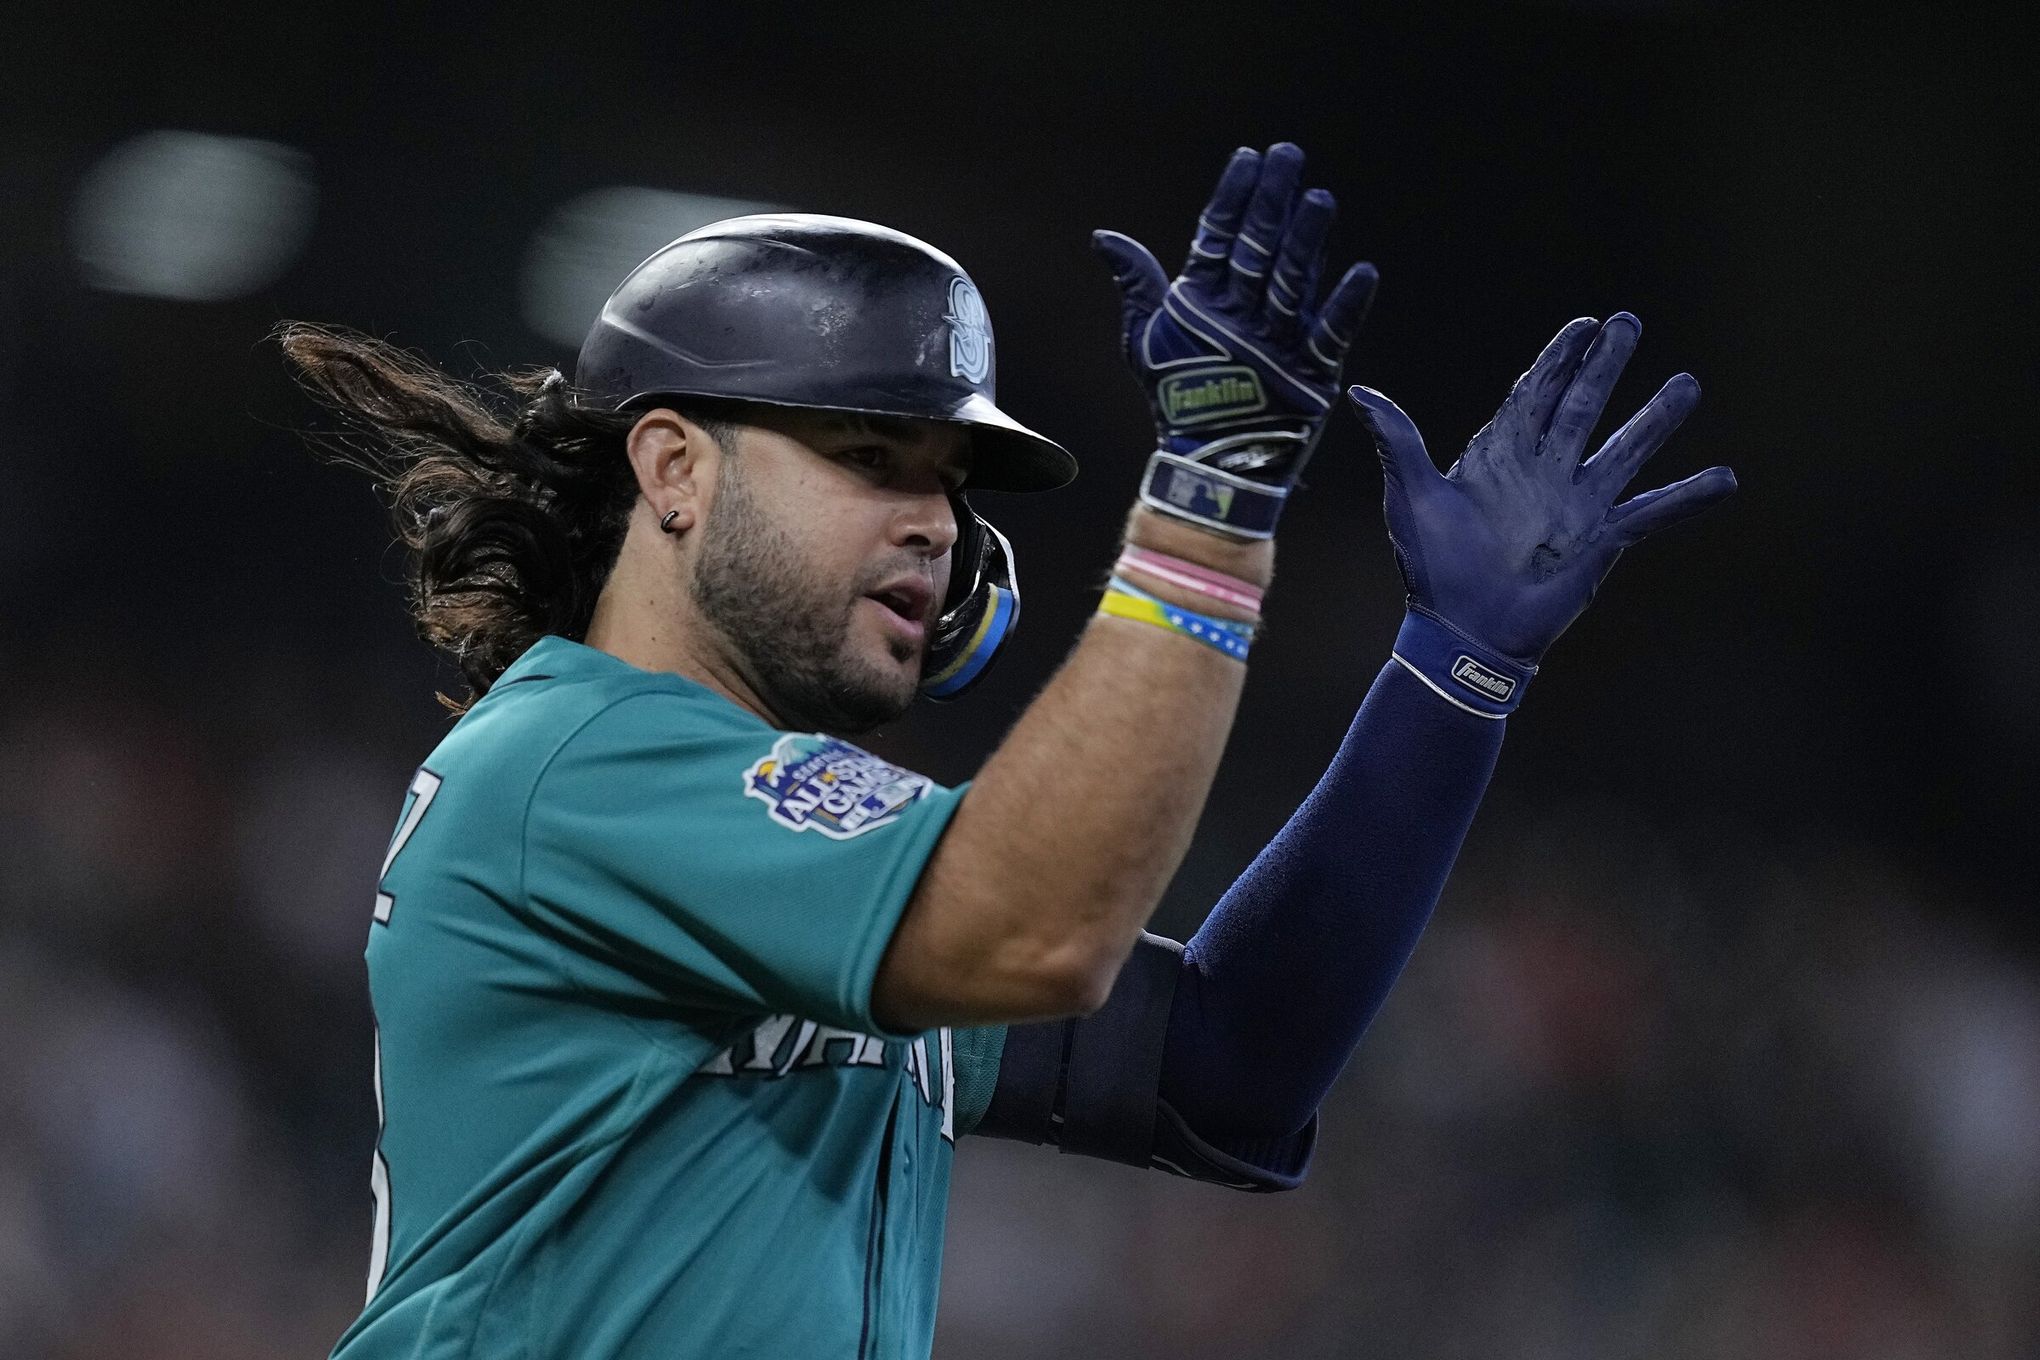 Moore homers twice and Rodriguez sets hits record as Mariners rout Astros